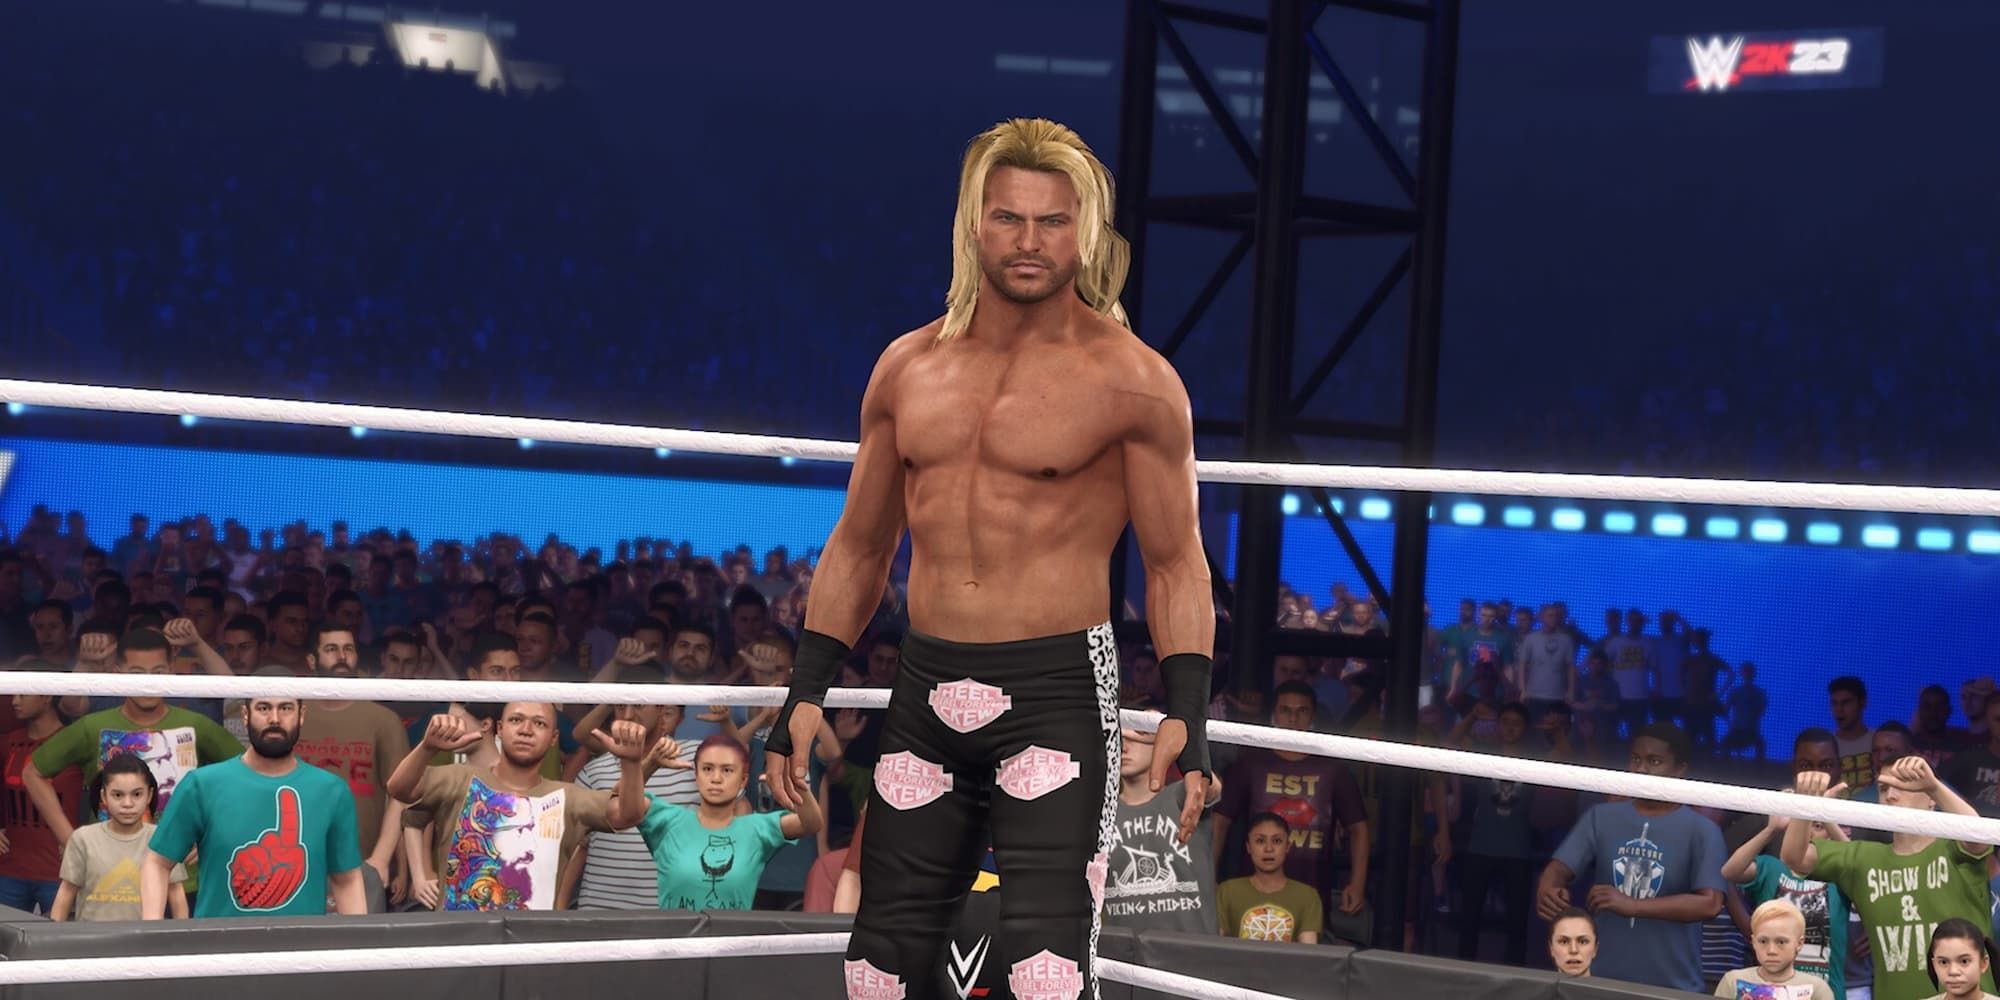 Dolph Ziggler stands in the corner of the ring, ready to wrestle in WWE 2K23.